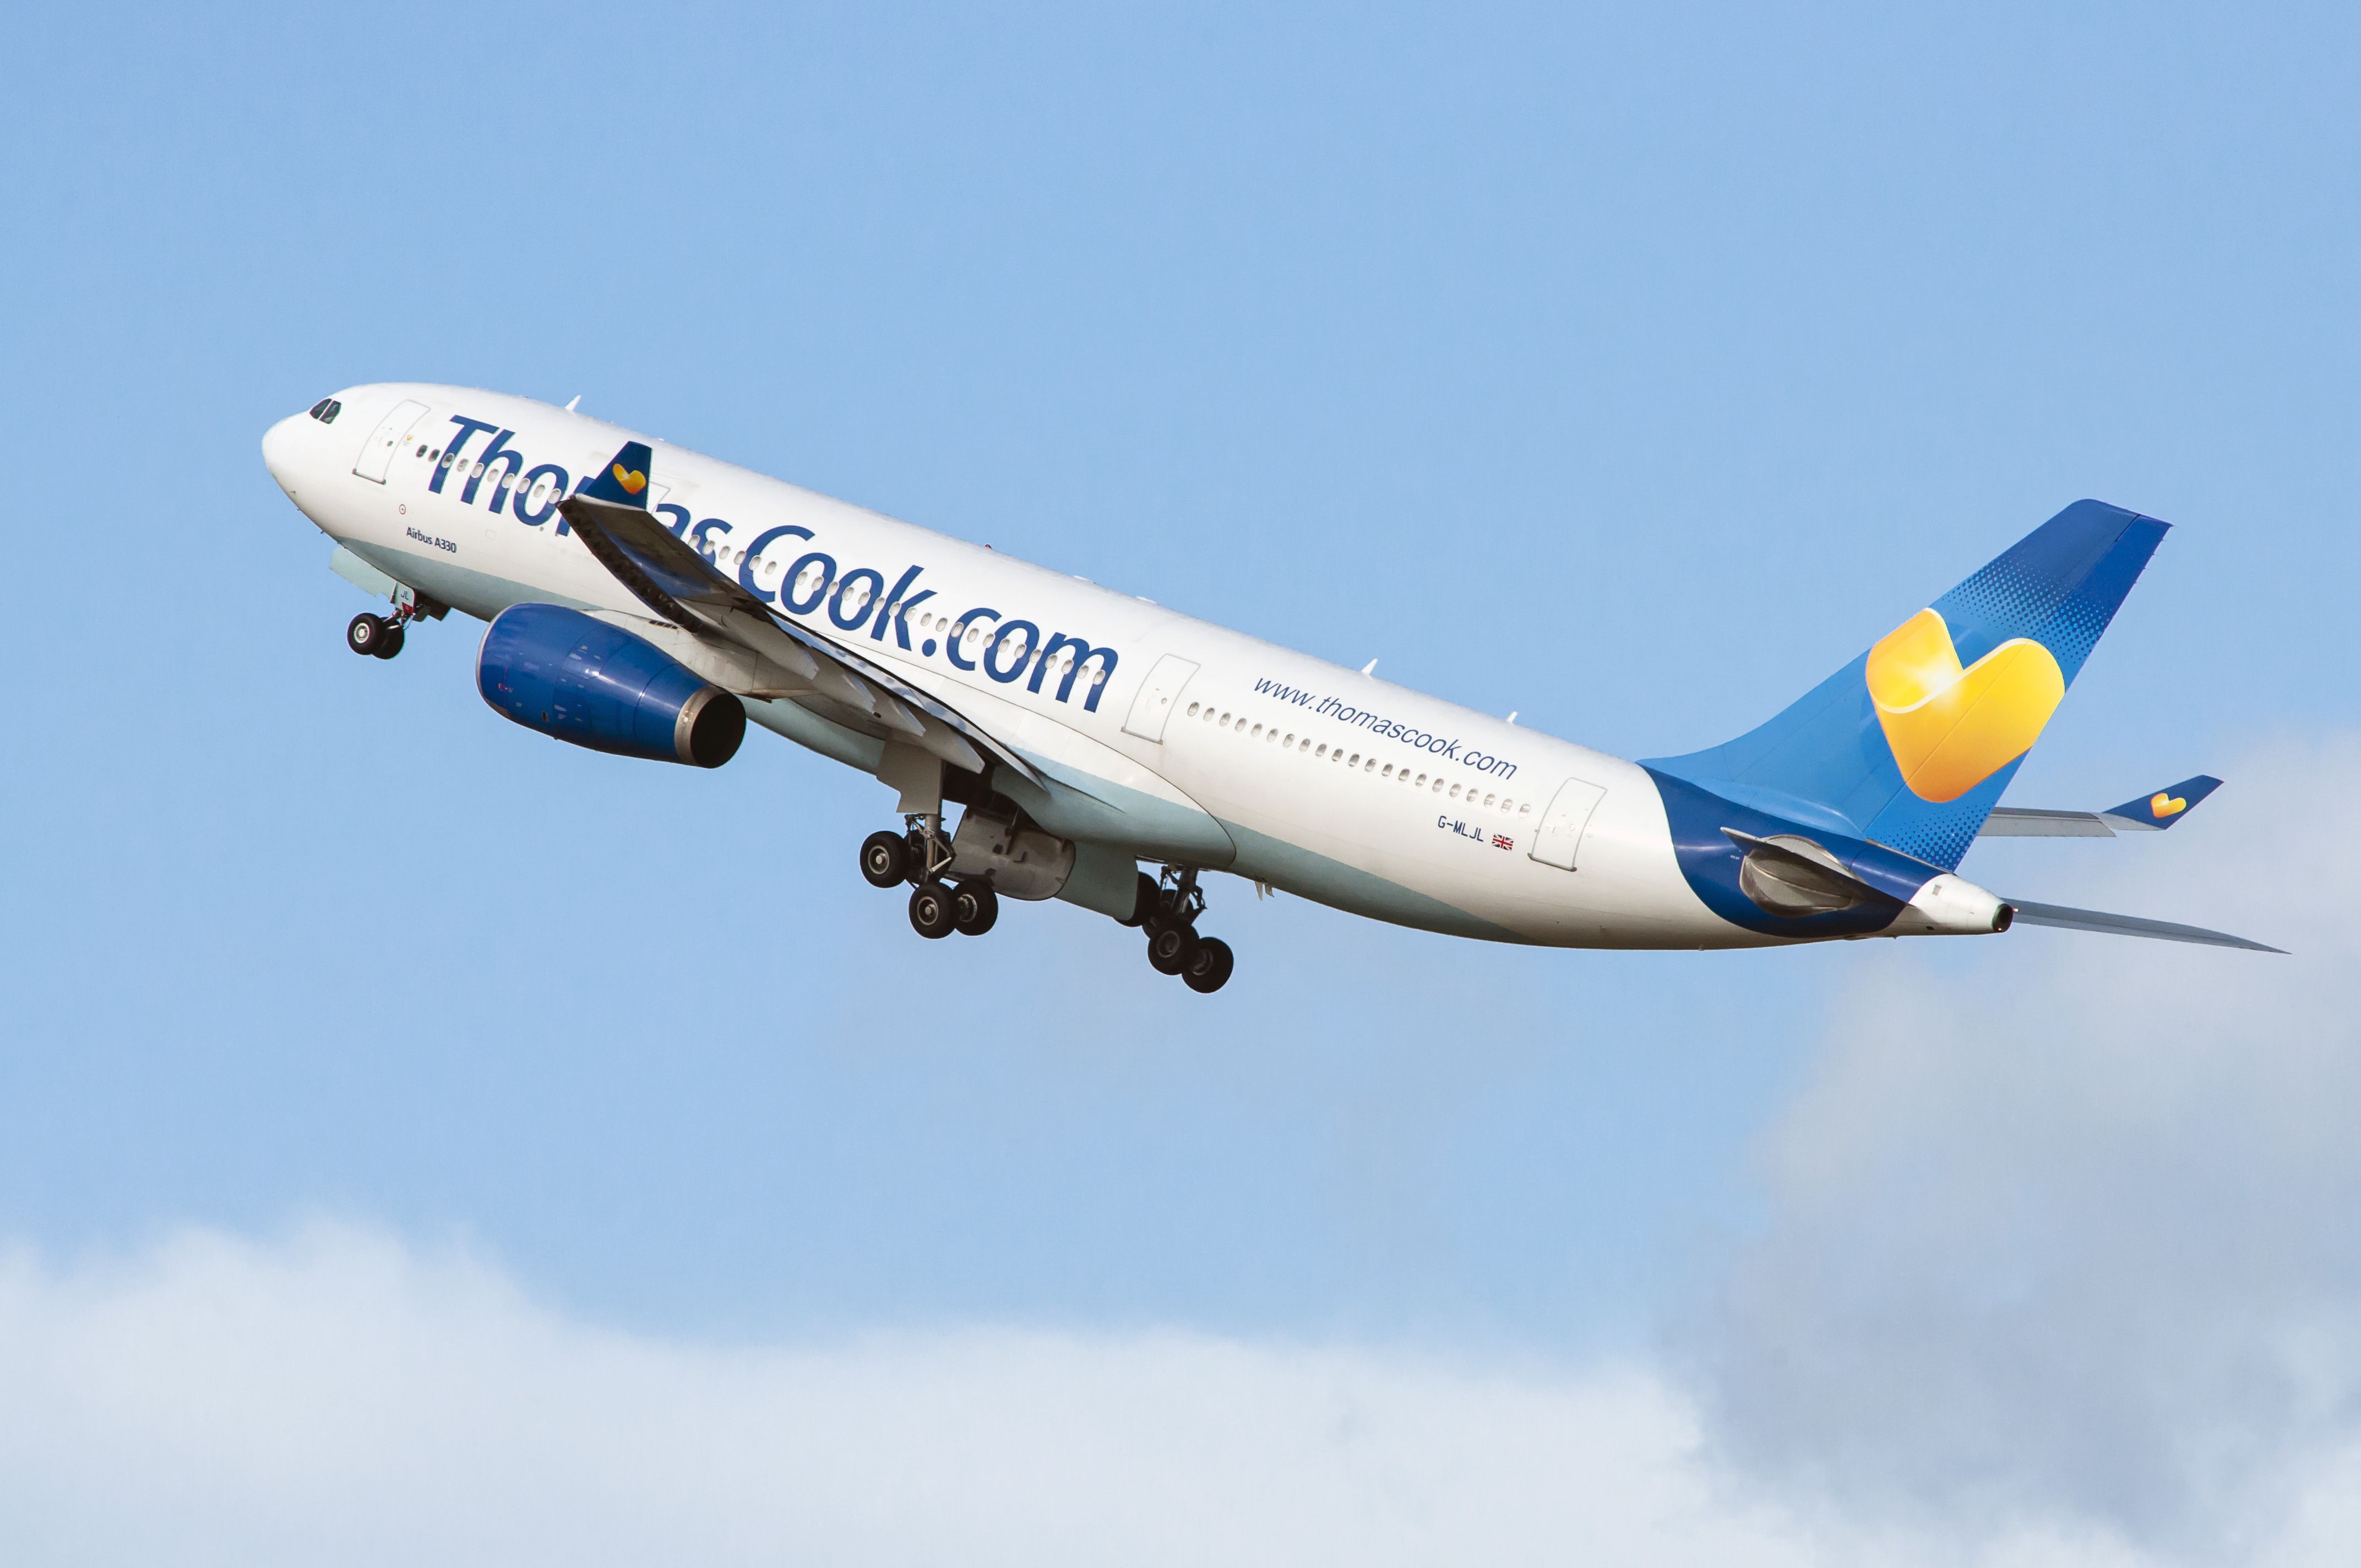 A Thomas Cook A330 flying in the sky.